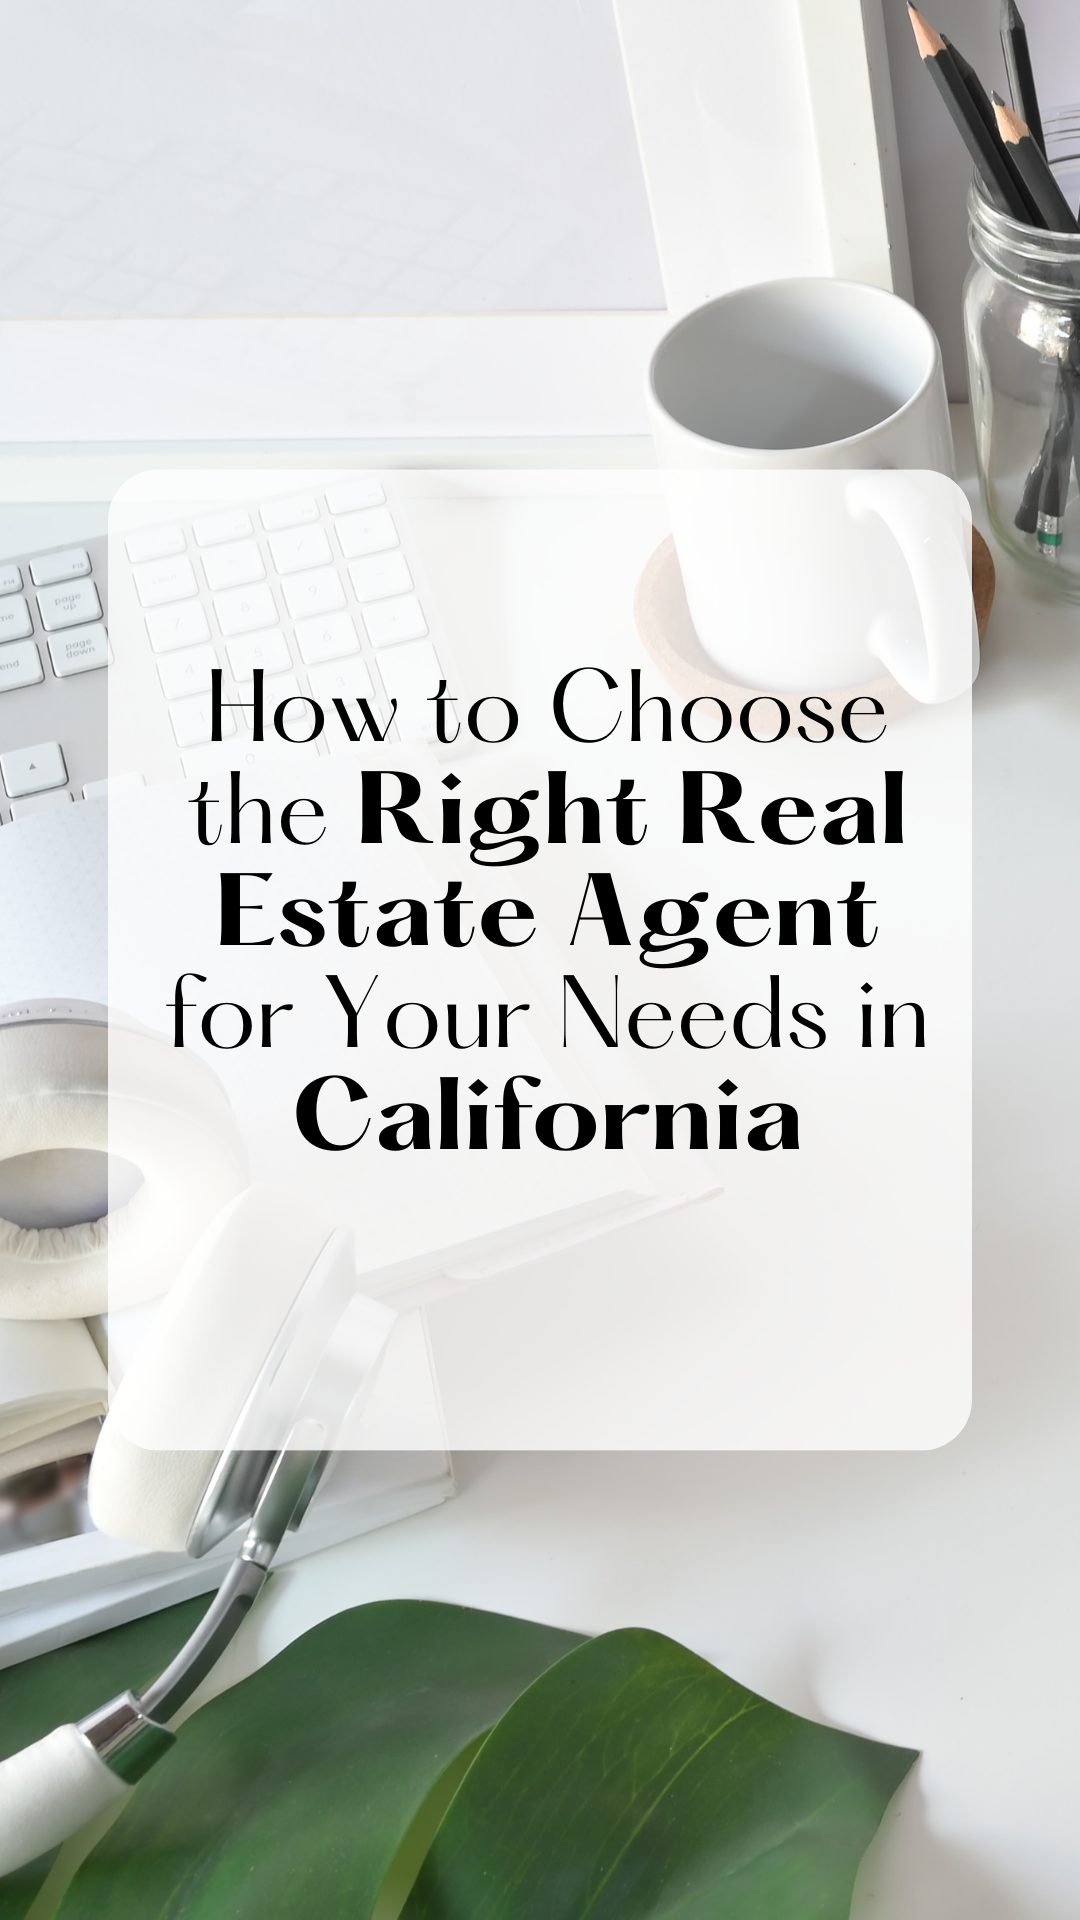 the Right Real Estate Agent